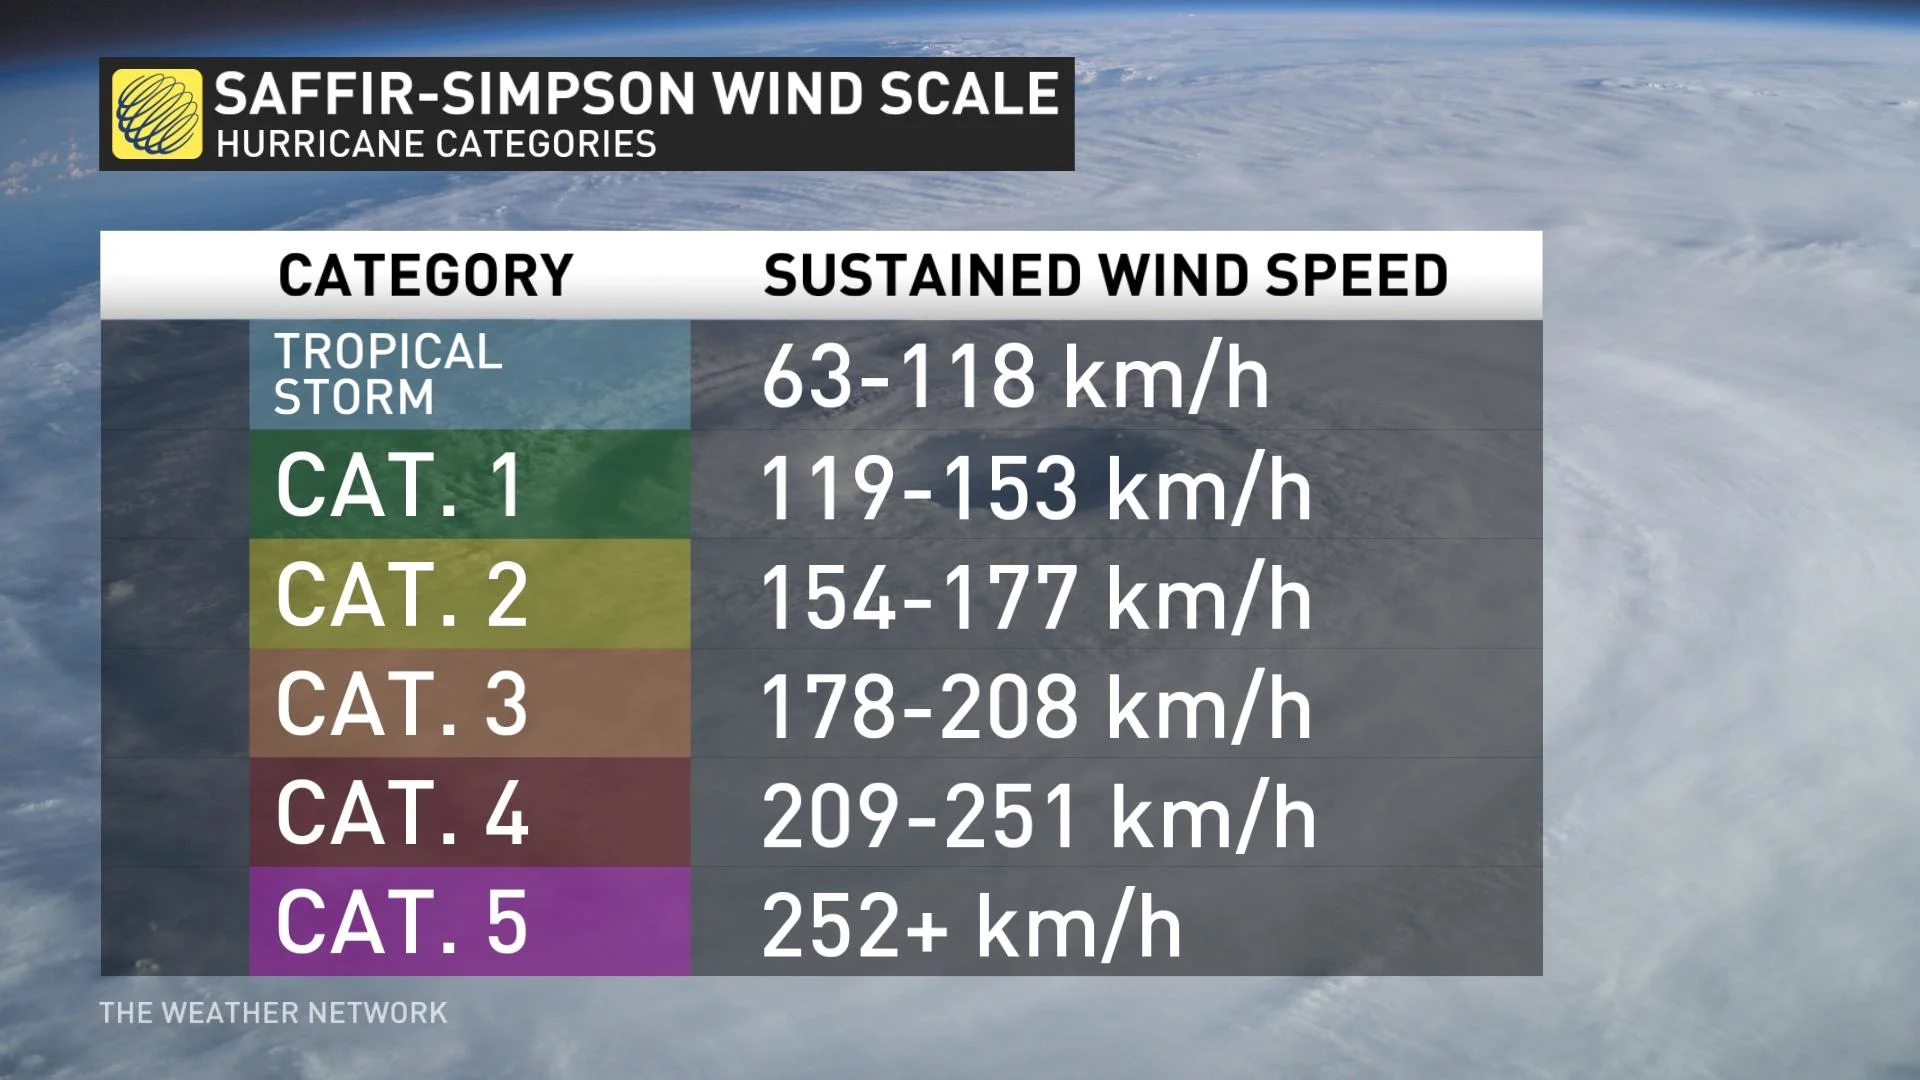 Hurricane Wind Speeds and Category